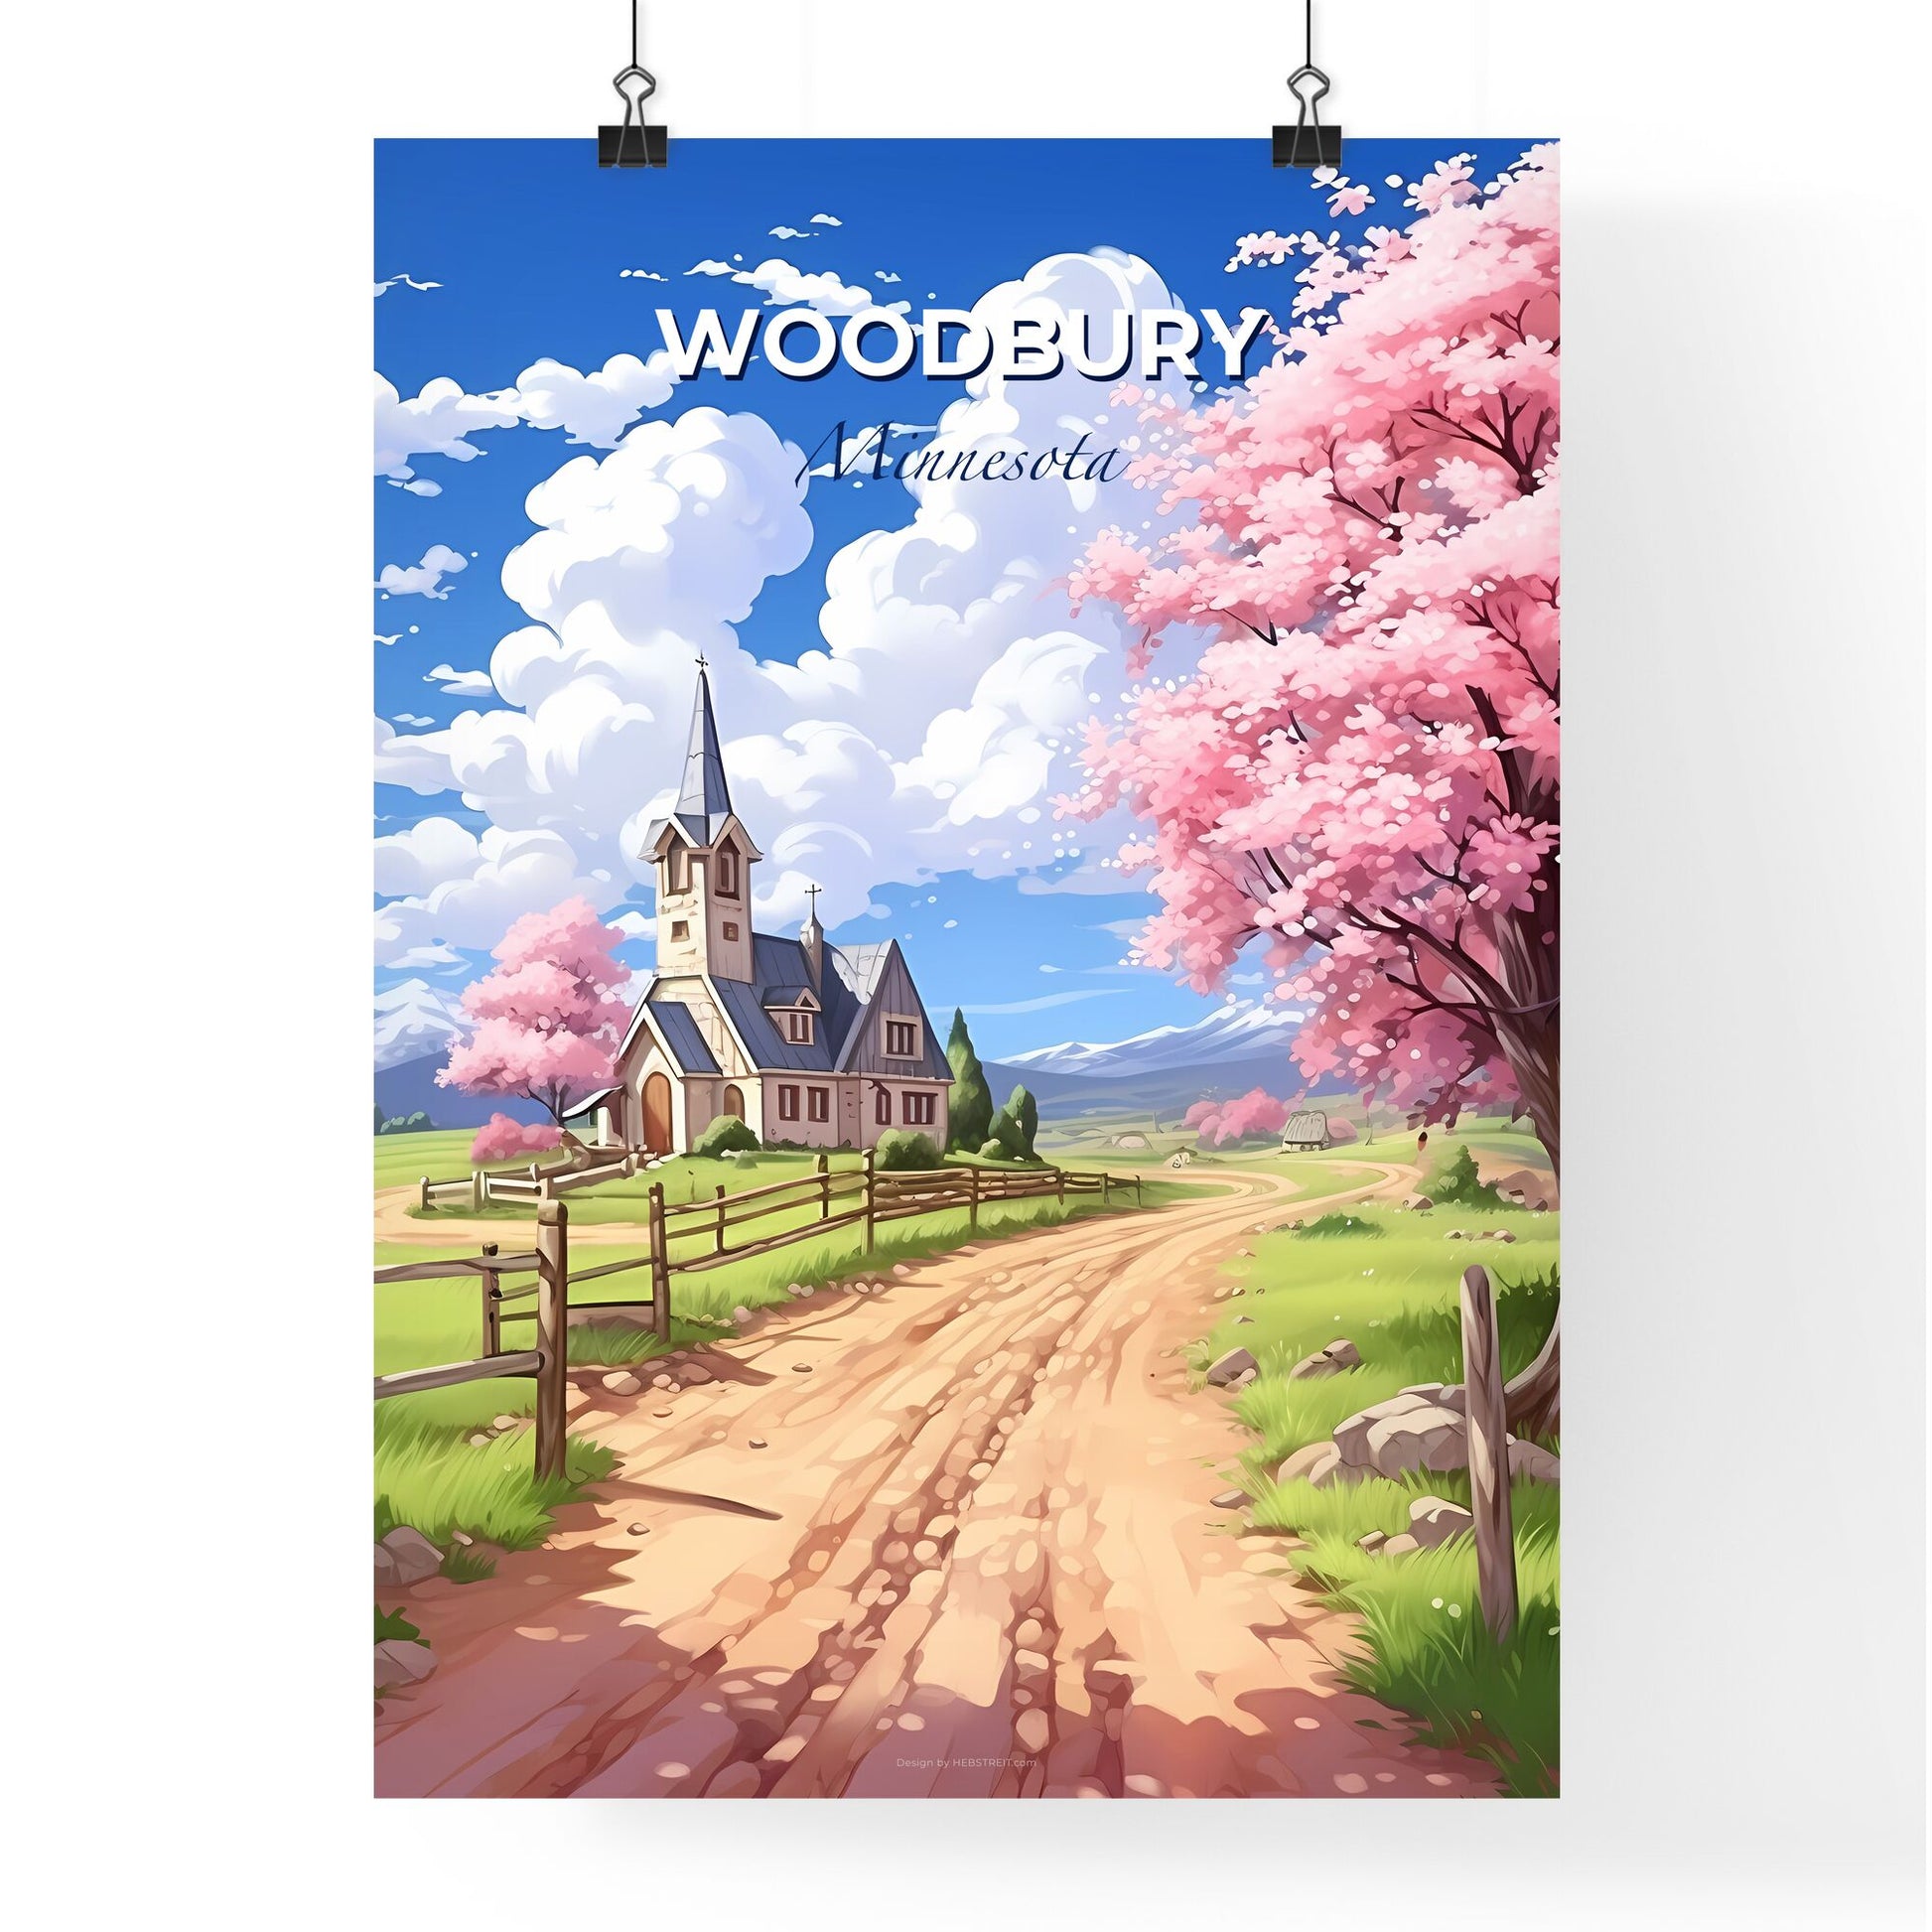 Woodbury, Minnesota, A Poster of a church on a dirt road Default Title